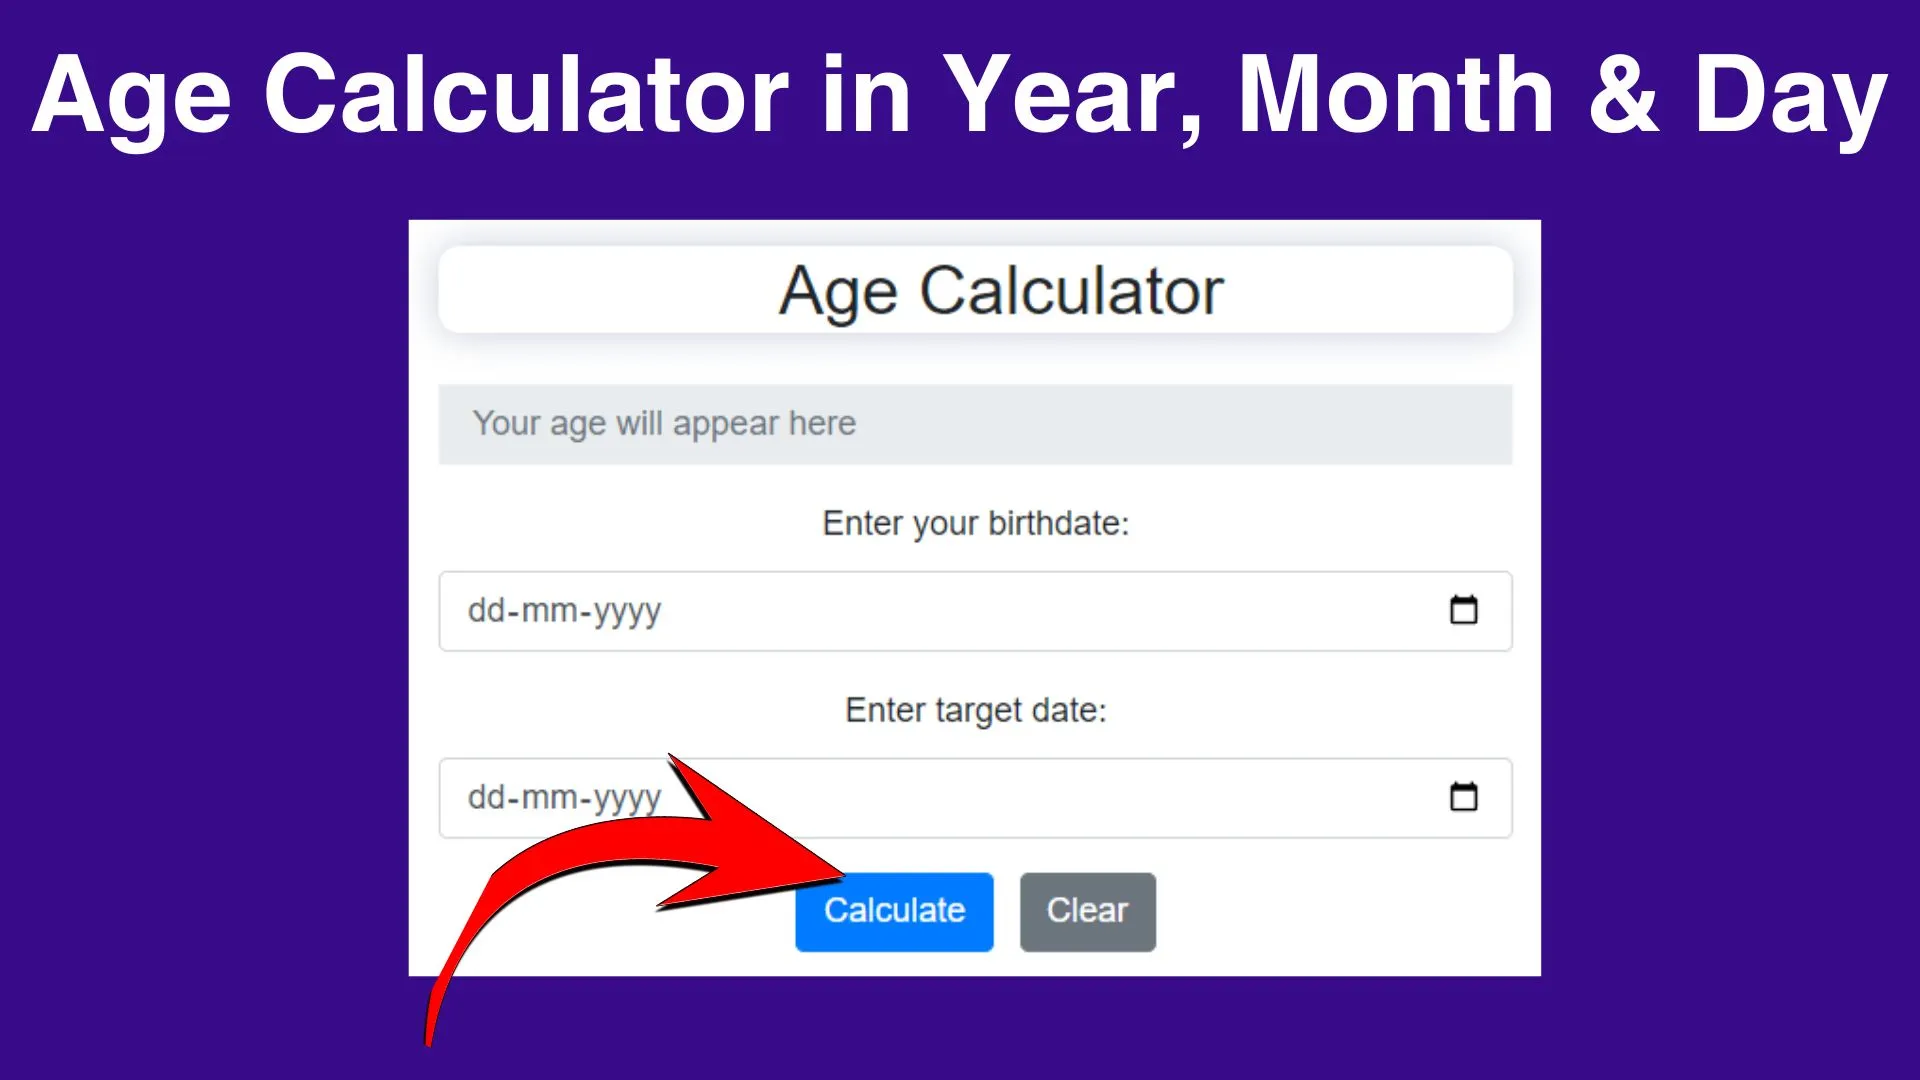 Age Calculator Calculate Age in Year, Month & Day